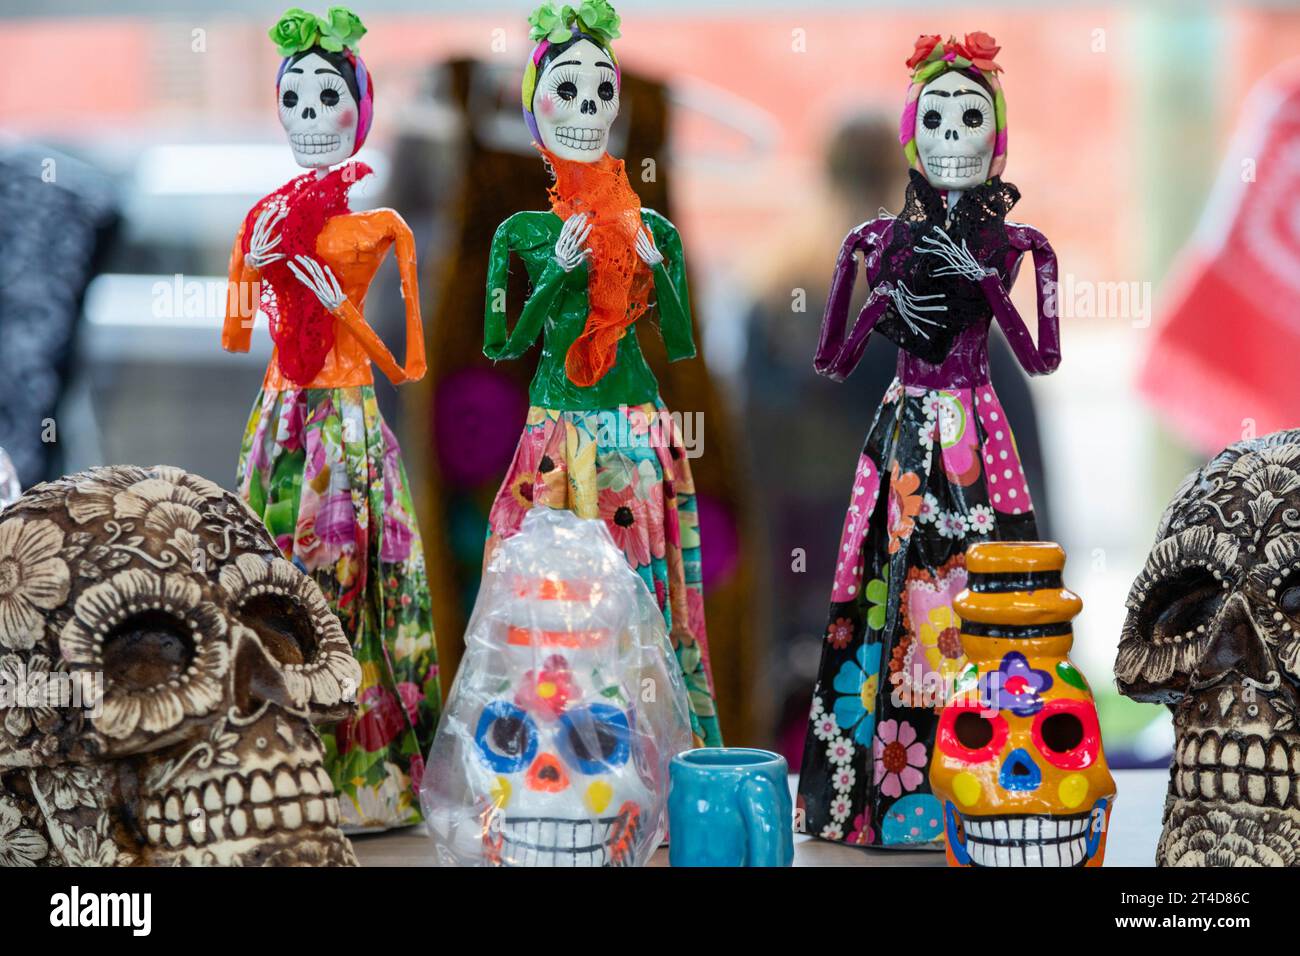 Detroit, Michigan - Items on sale at the Day of the Dead celebration at Valade Park on the Detroit Riverfront. Stock Photo